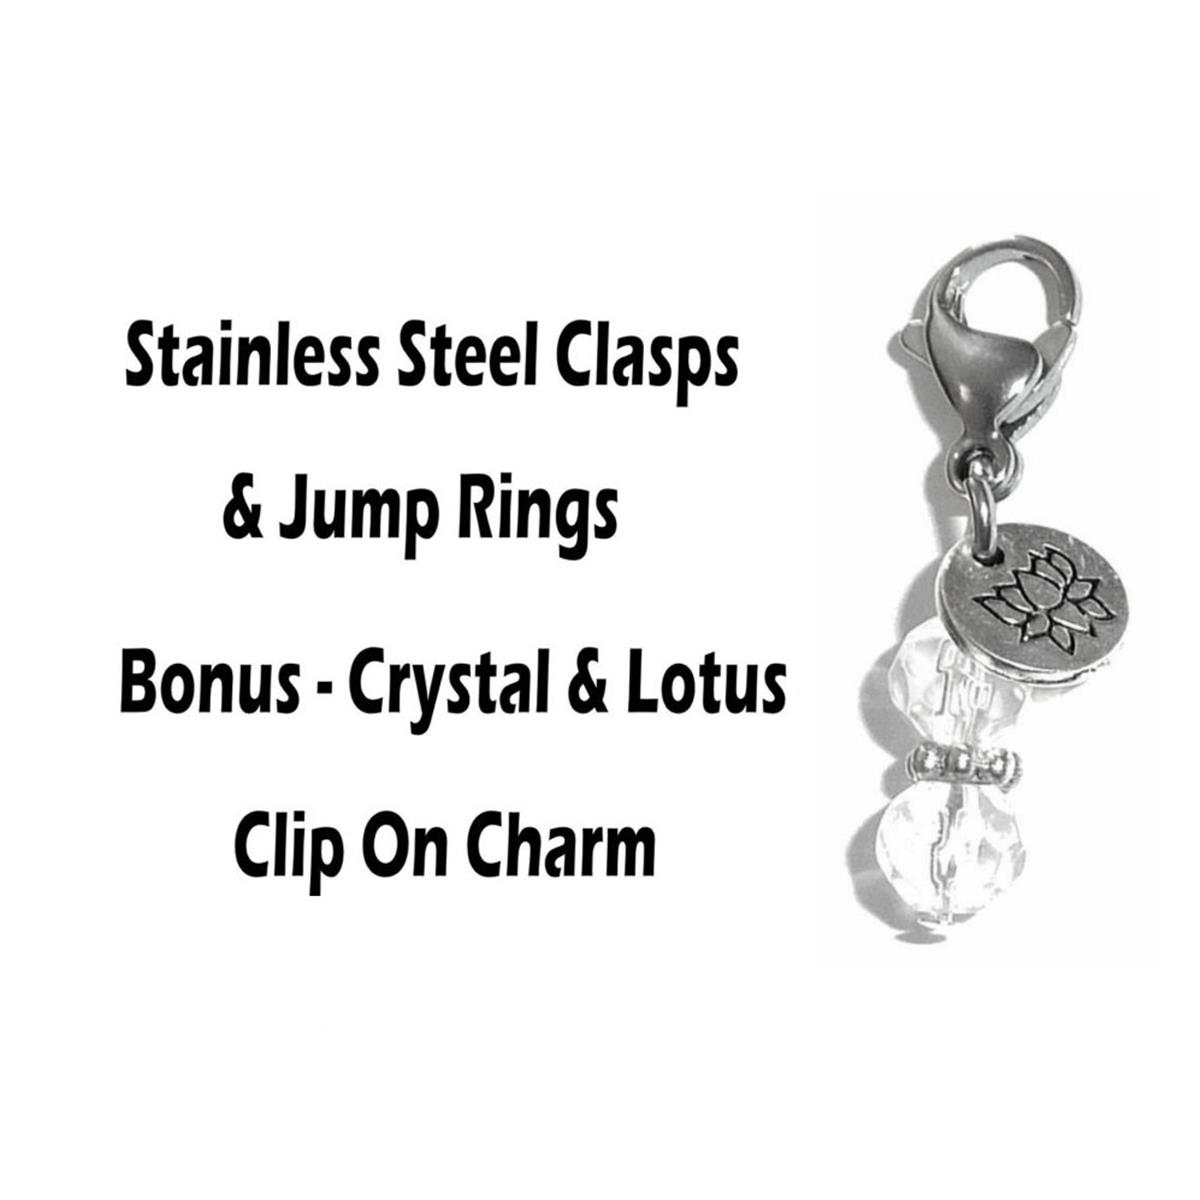 Believe In Yourself Clip On Charms - Inspirational Charms Clip On Anywhere